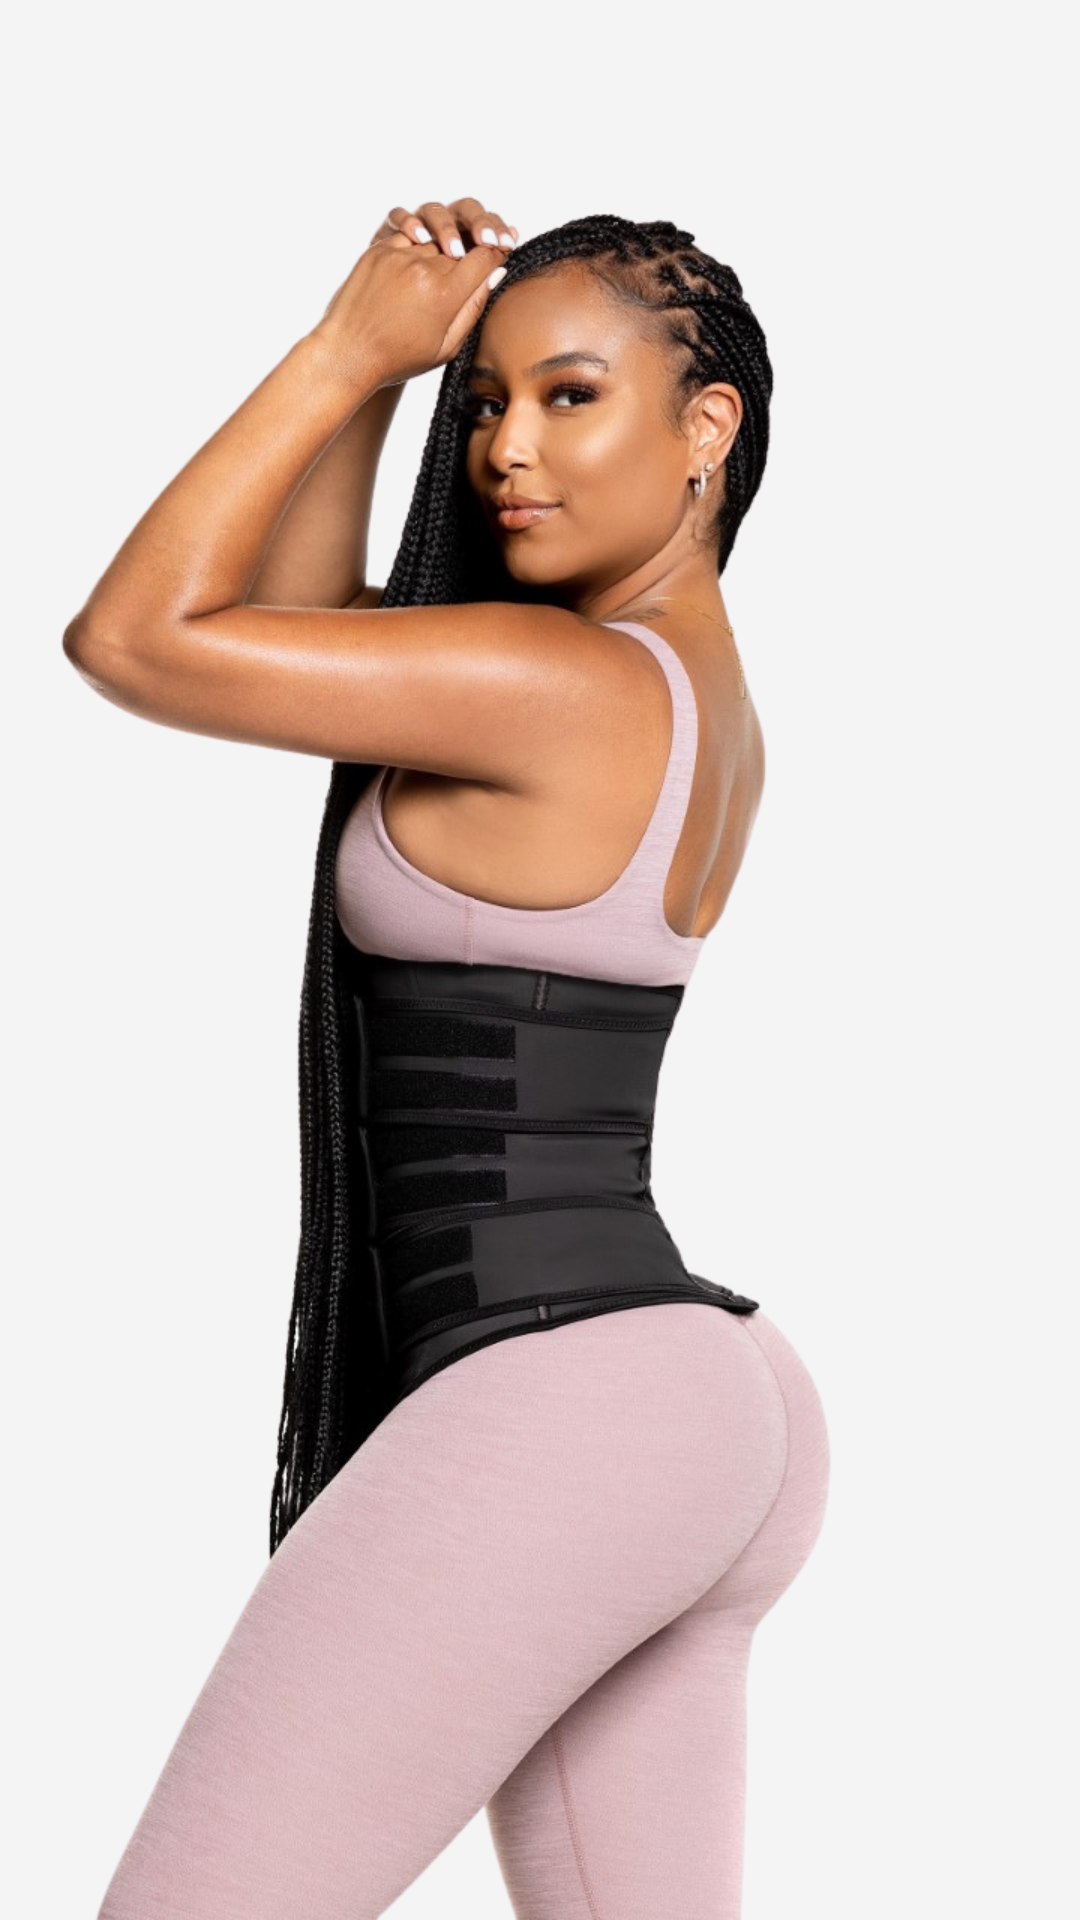 The Best Waist Trainer on the market - Leisure Forever – Leisure Forever CA